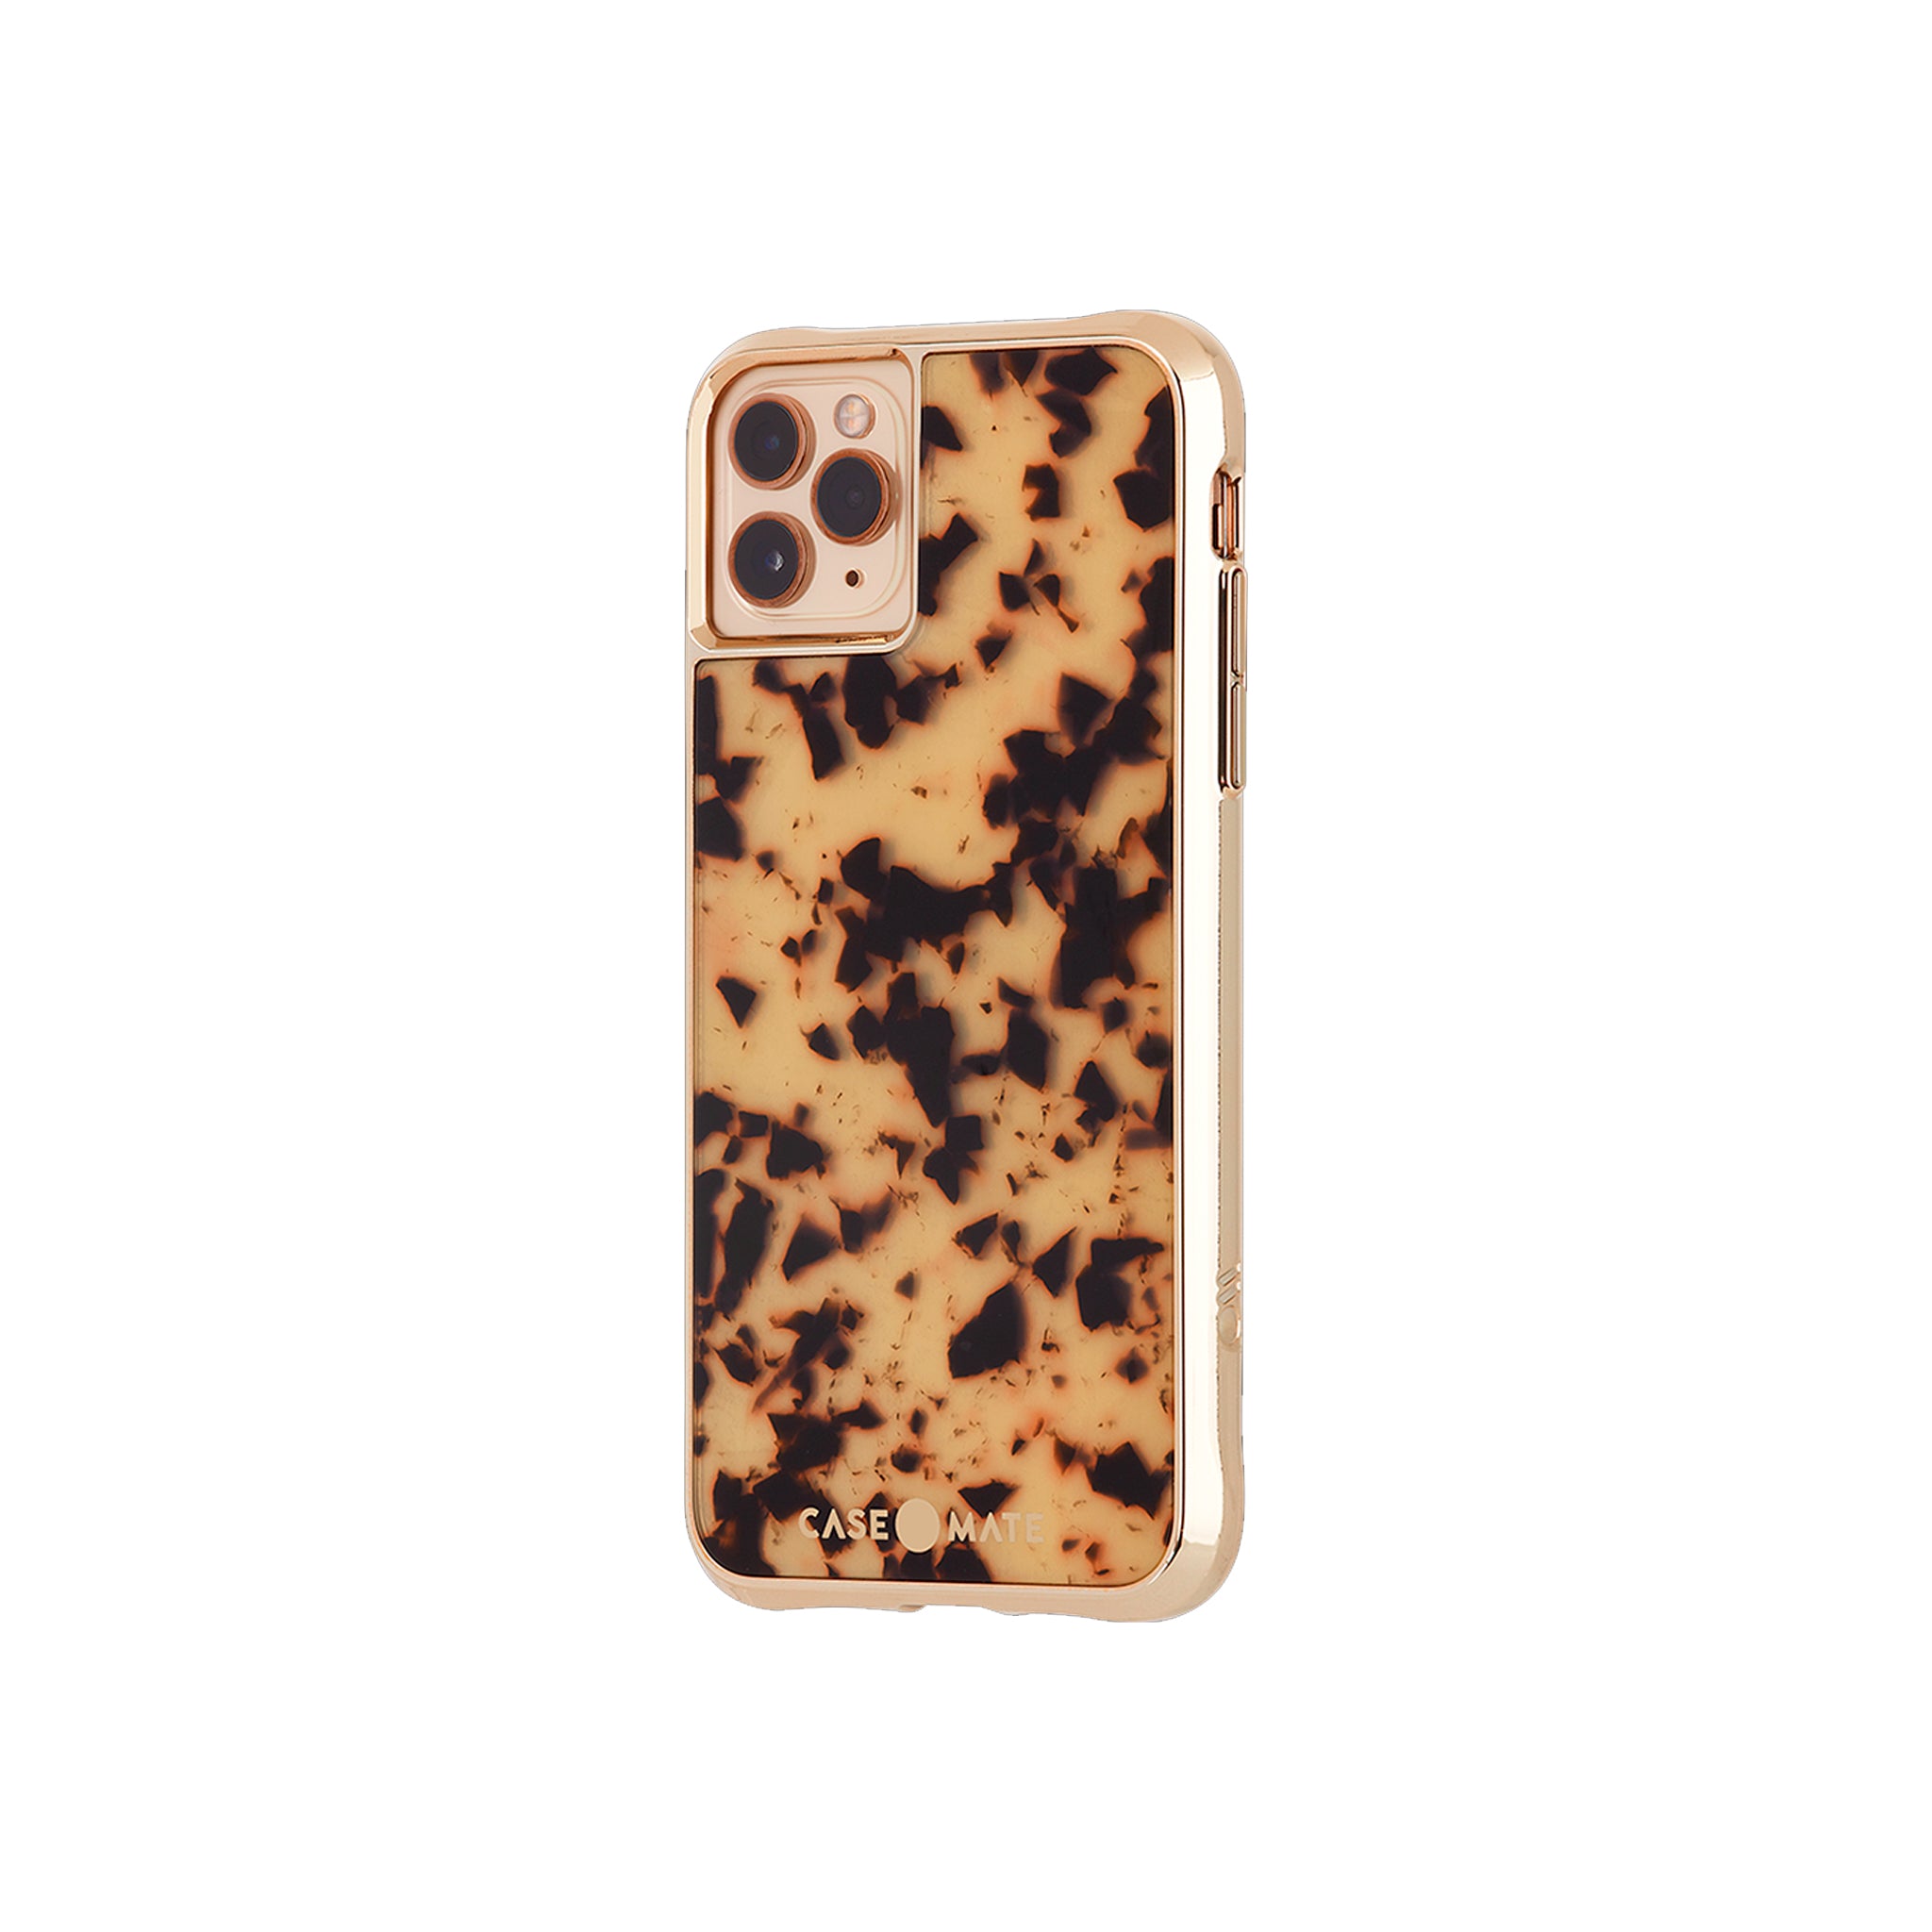 Case-mate - Acetate Case For Apple iPhone 11 Pro / Xs / X - Tortise Shell